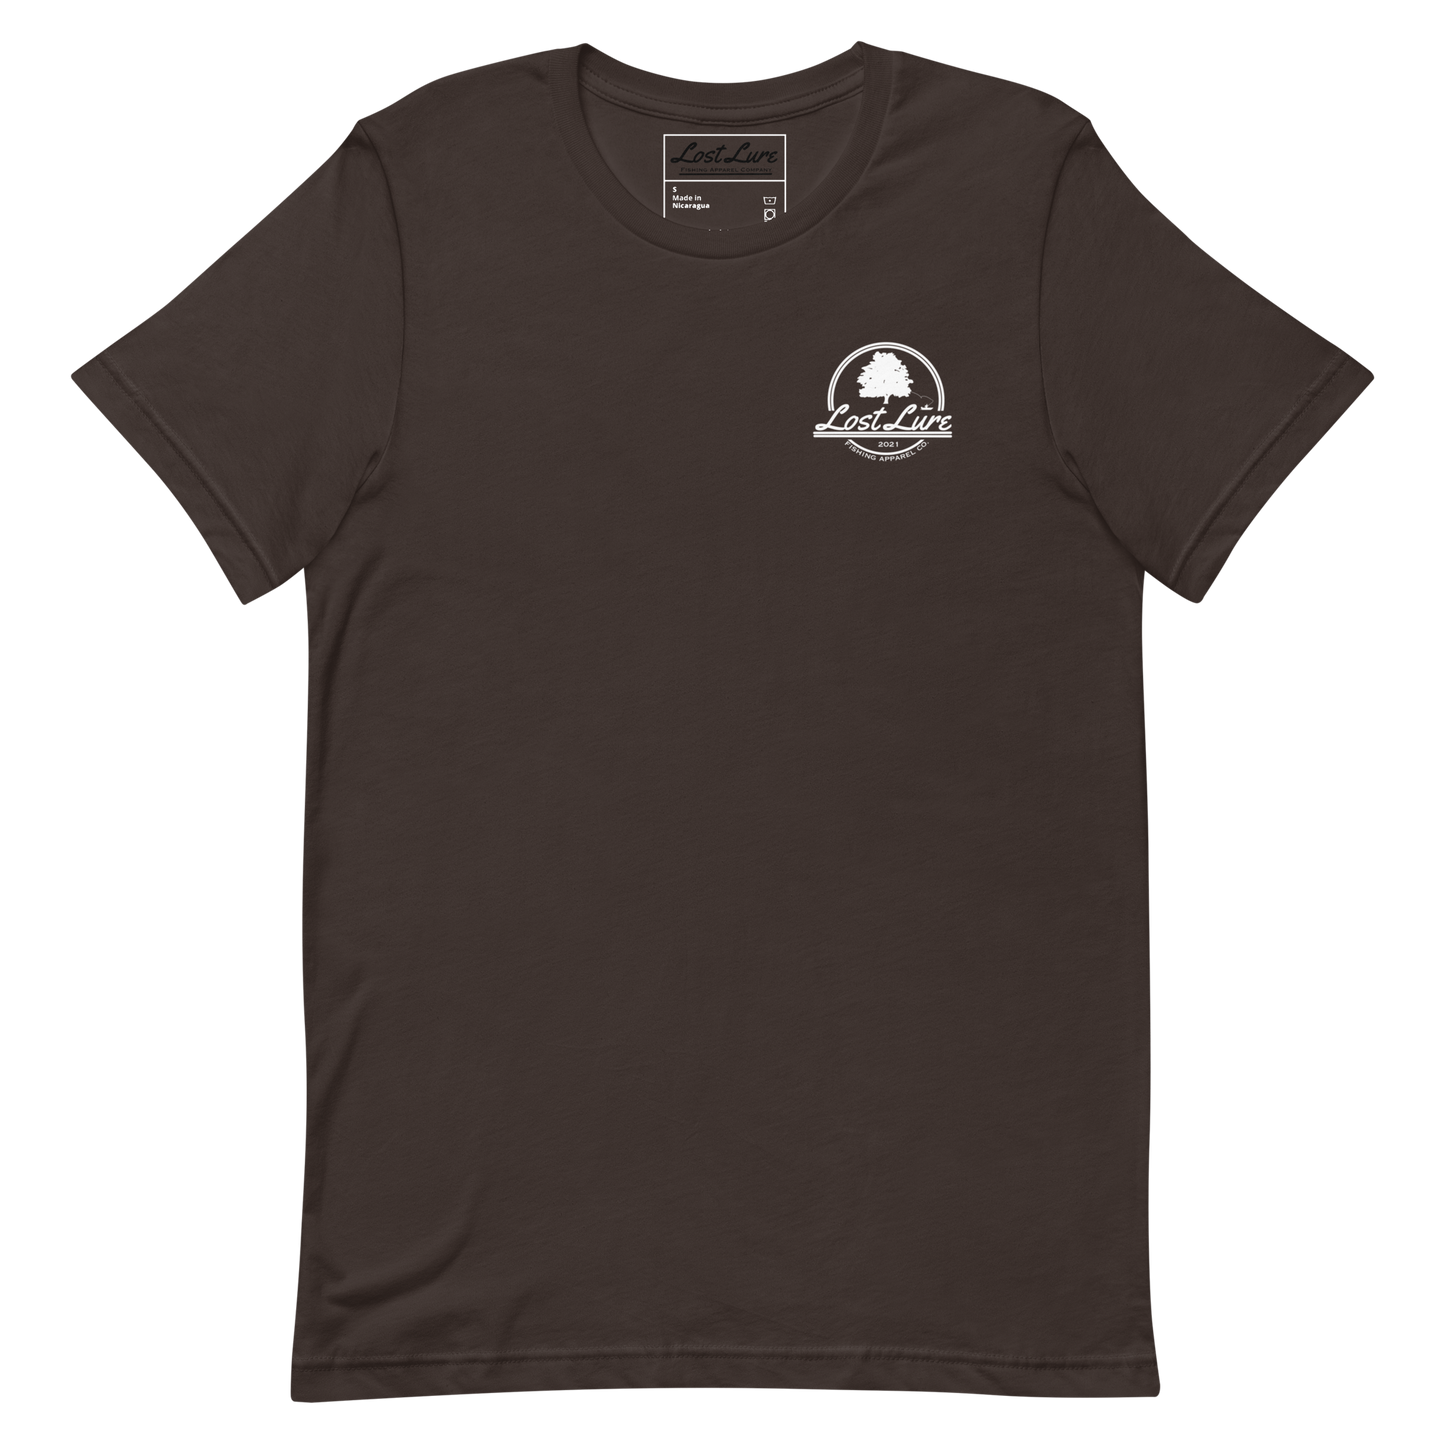 Cutthroat Trout fishing shirt. It’s an American traditional style design with a cutthroat trout and a dagger. The shirt reads Cutthroat trout, est. 2021, lost lure fishing apparel company. The front of the shirt has the lost lure logo. Brown fishing shirt, front side 